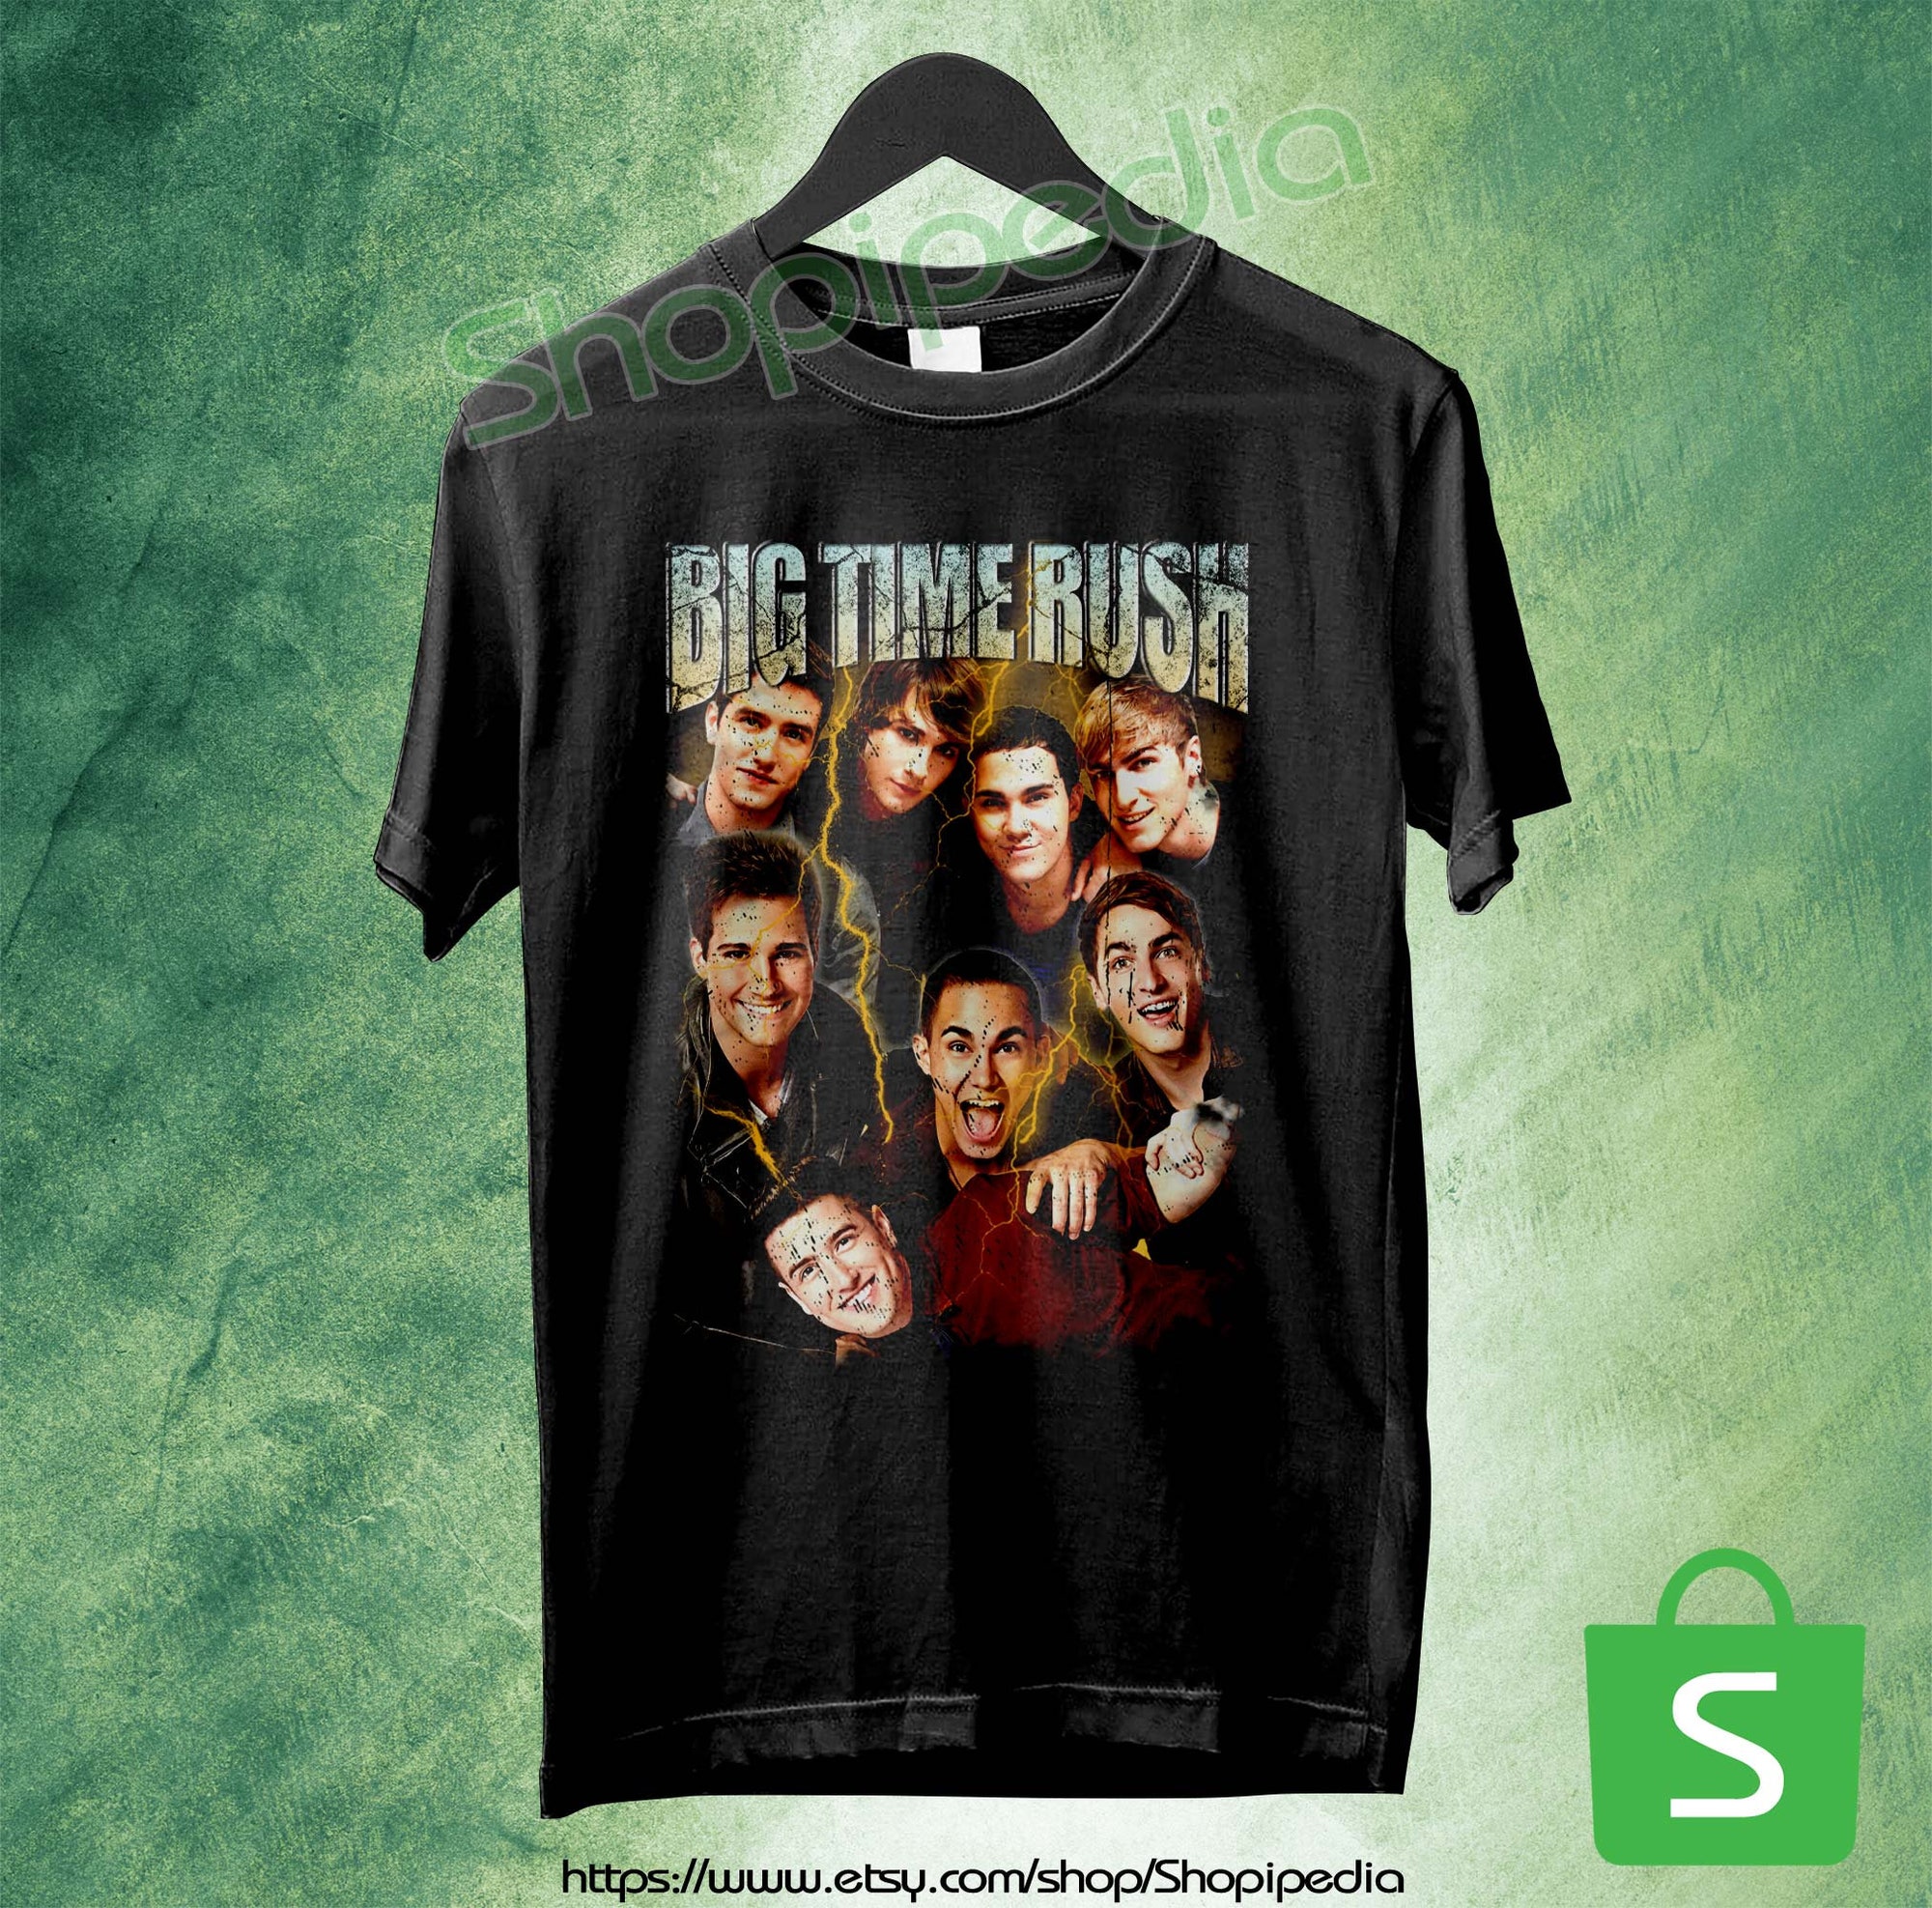 Discover Big Time Rush Vintage 90's Style T-shirt